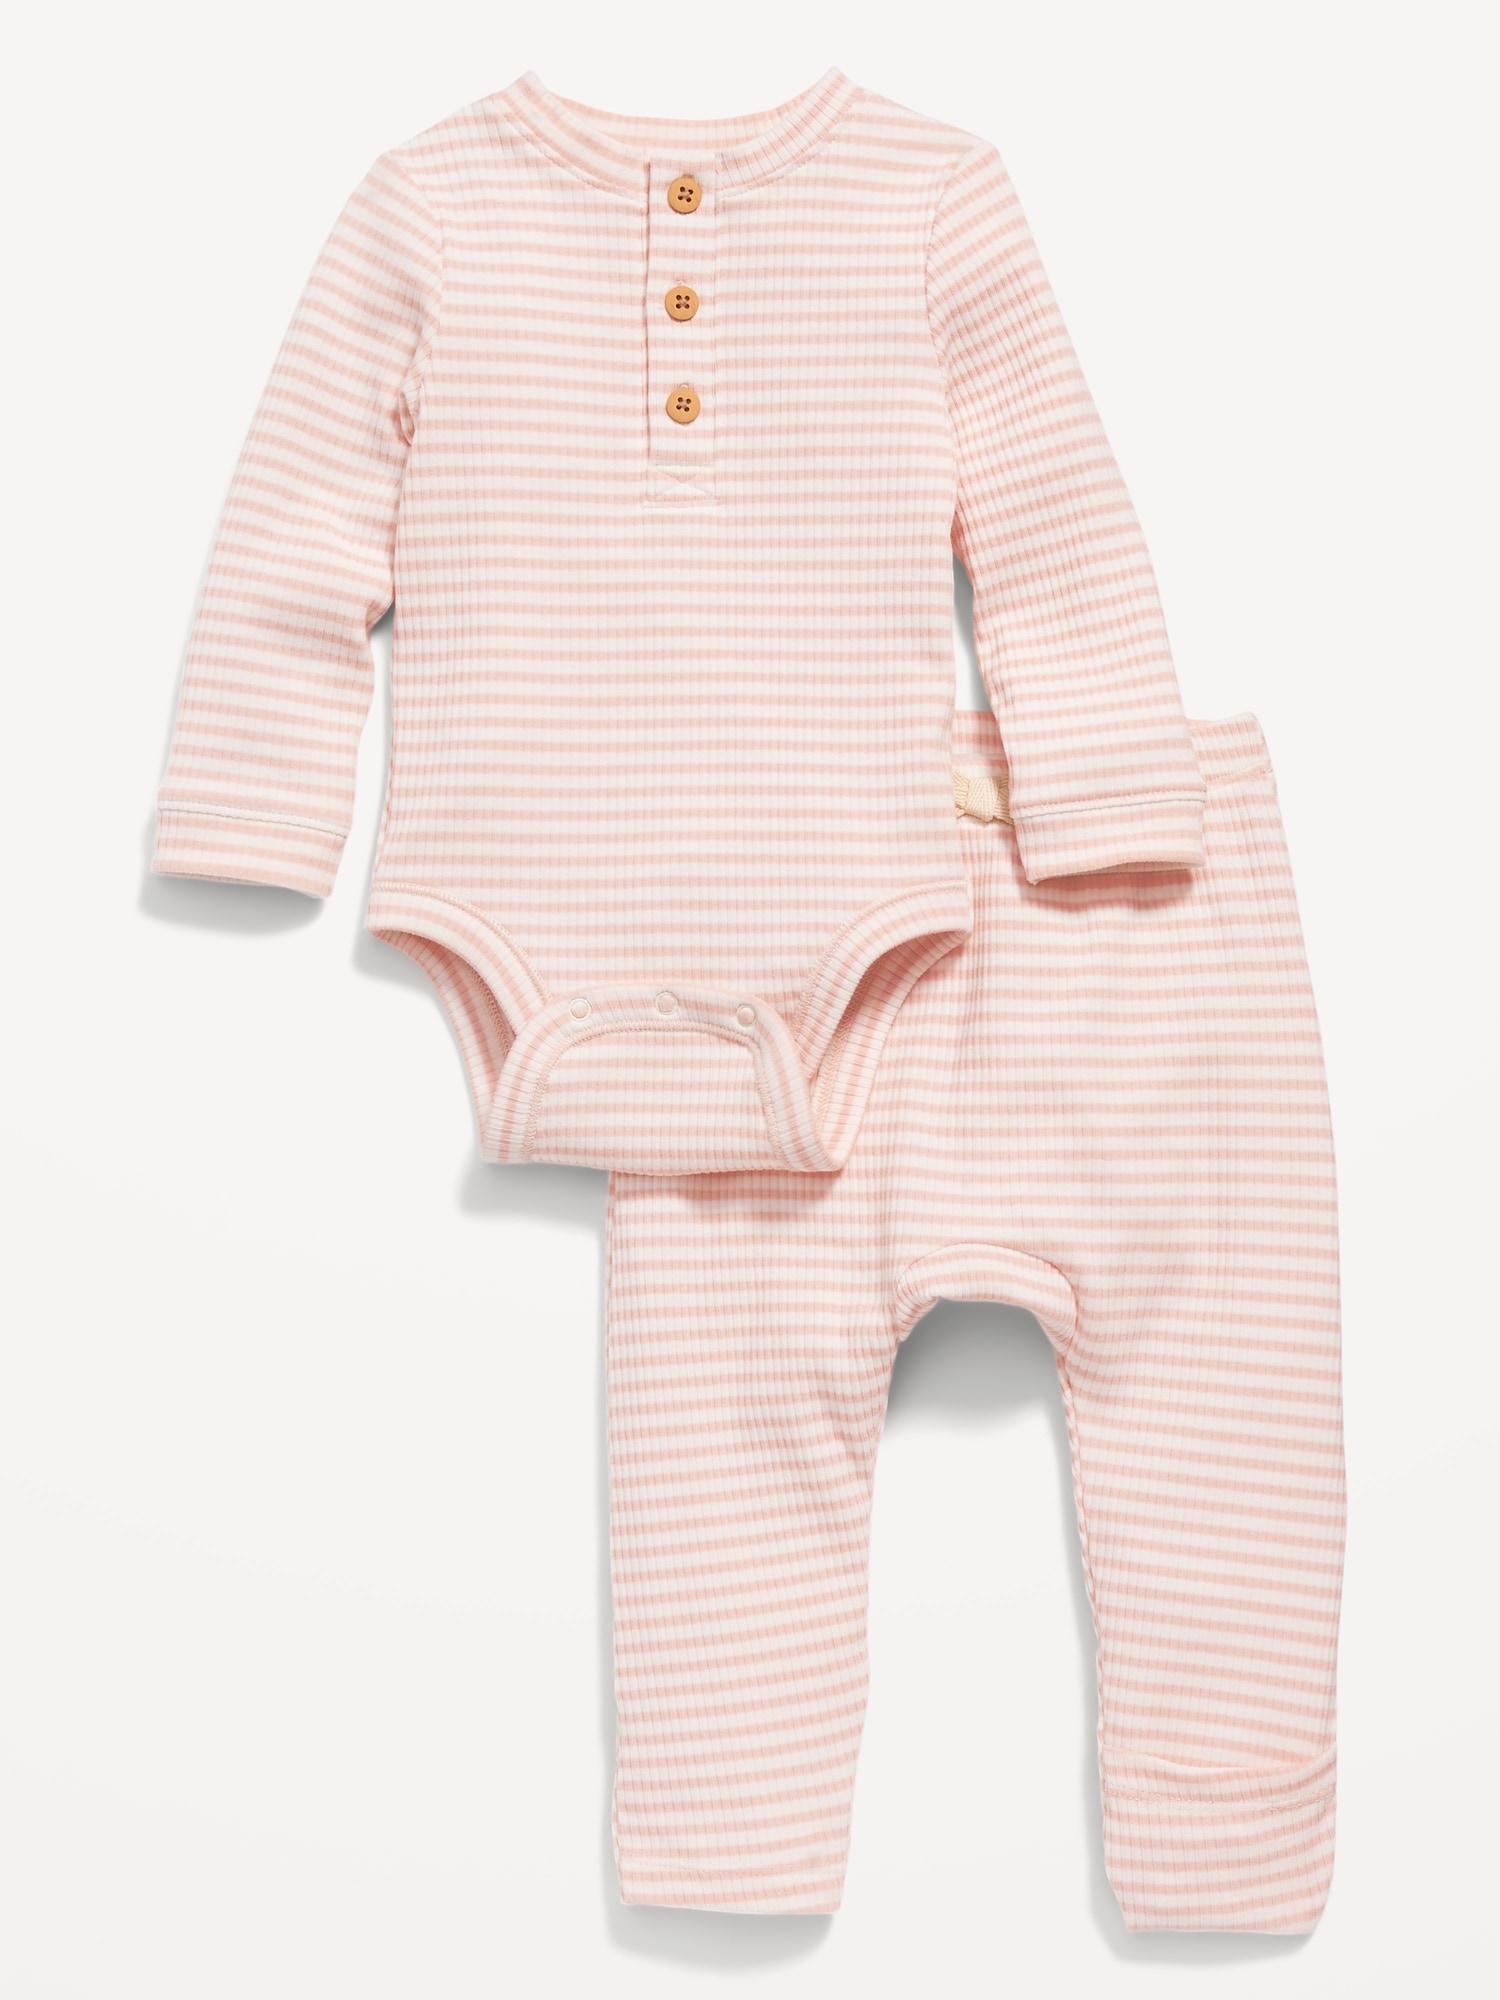 Unisex 2-Piece Rib-Knit Henley Bodysuit and Leggings Layette Set for Baby